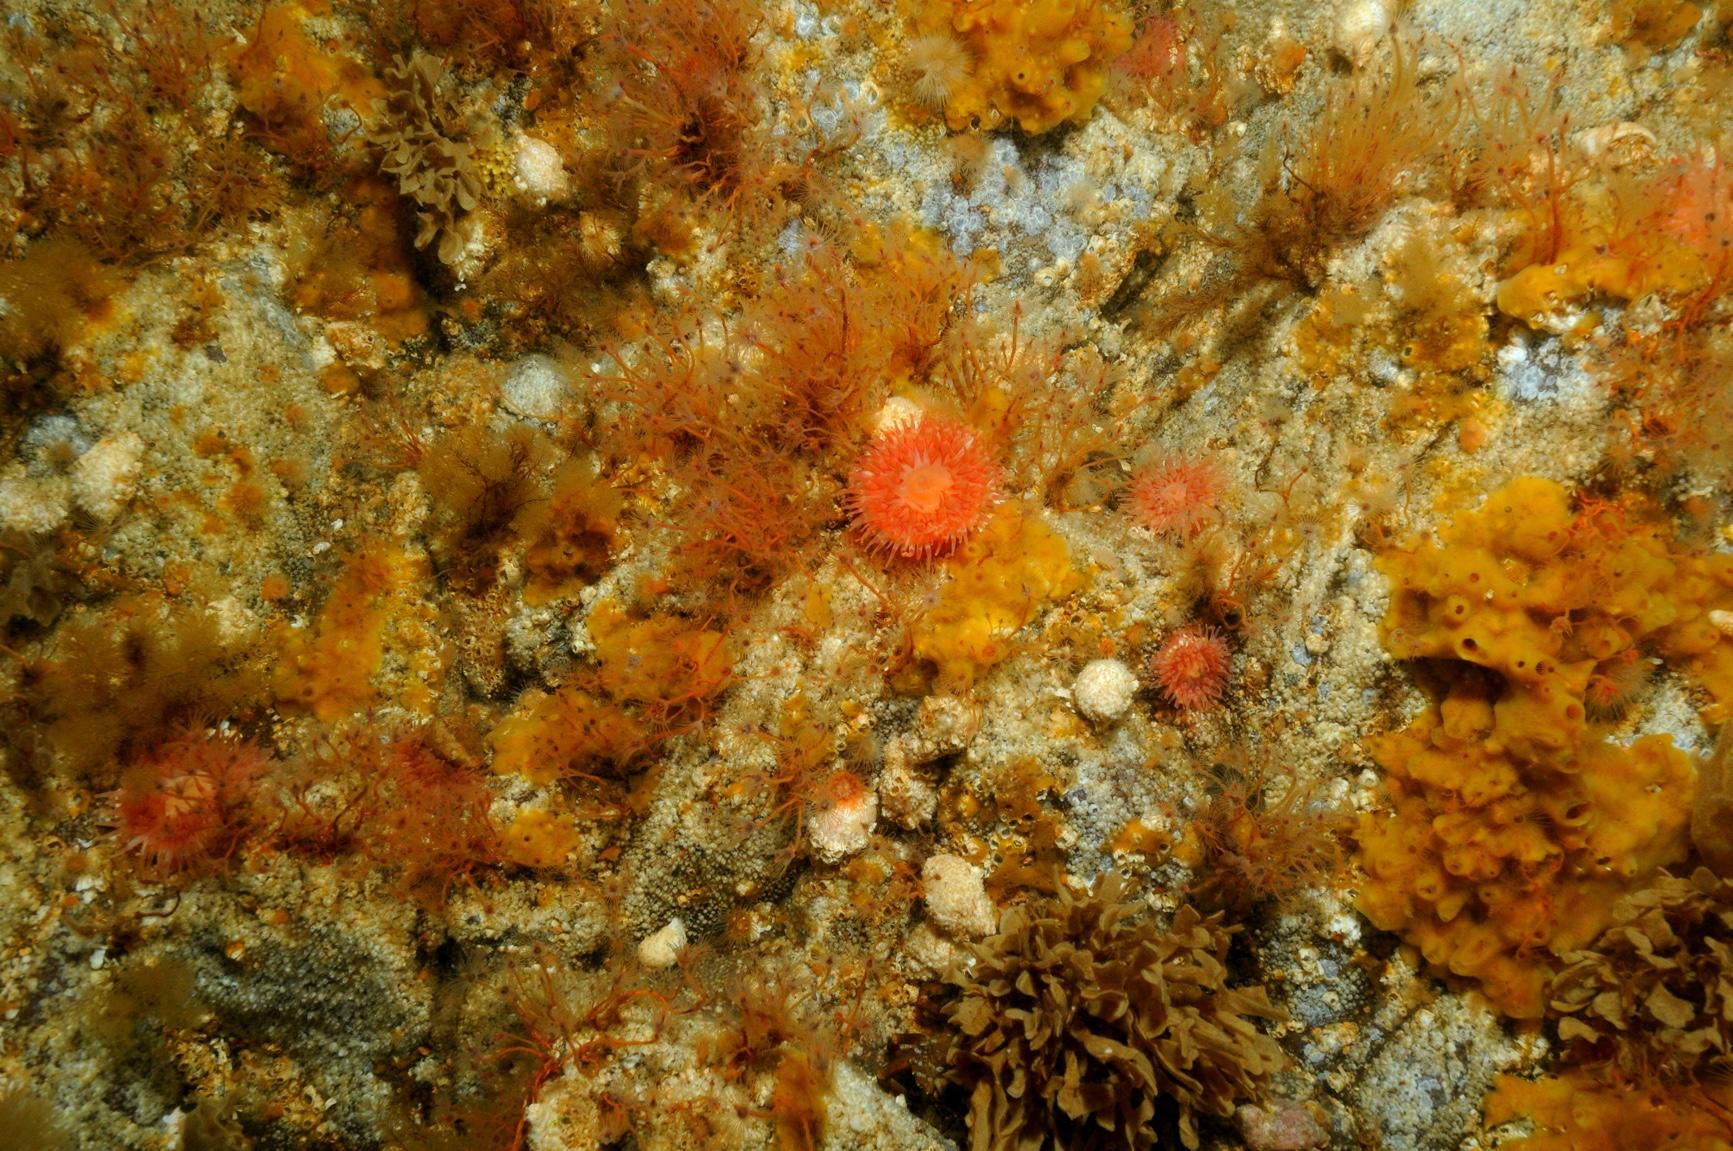 West of Duddon Sands Offshore Wind Farm, Survey of Morecambe Bay for the Tube-dwelling Polychaete Sabellaria spinulosa